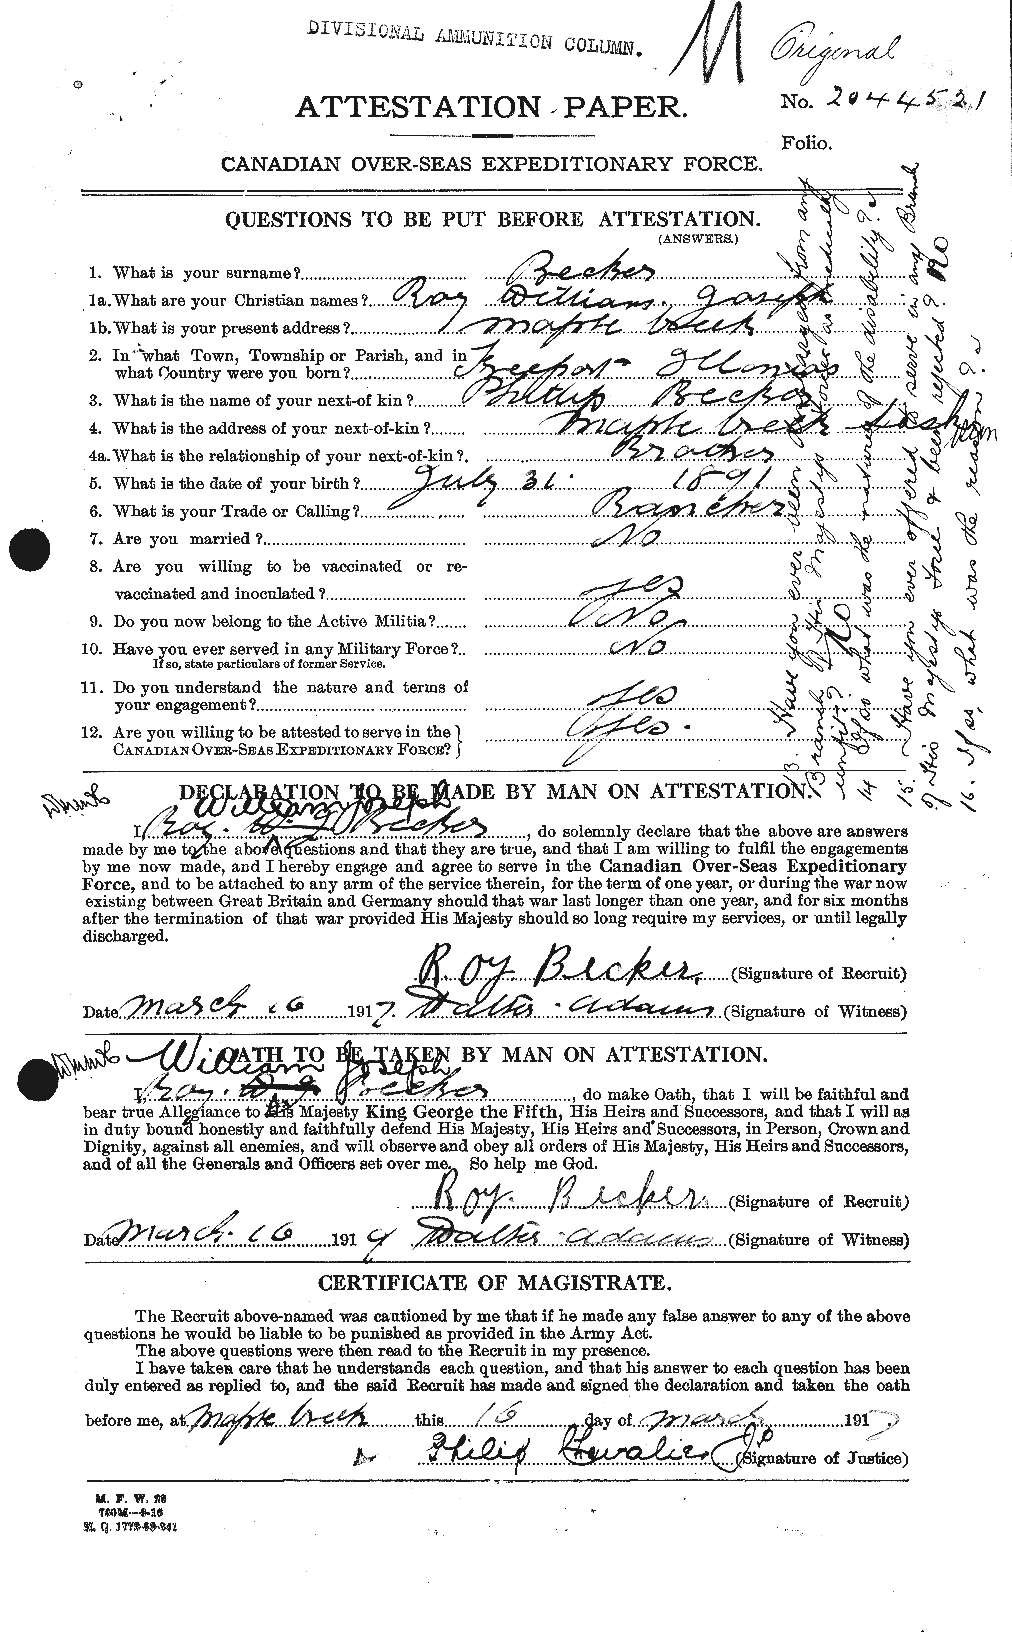 Personnel Records of the First World War - CEF 232308a